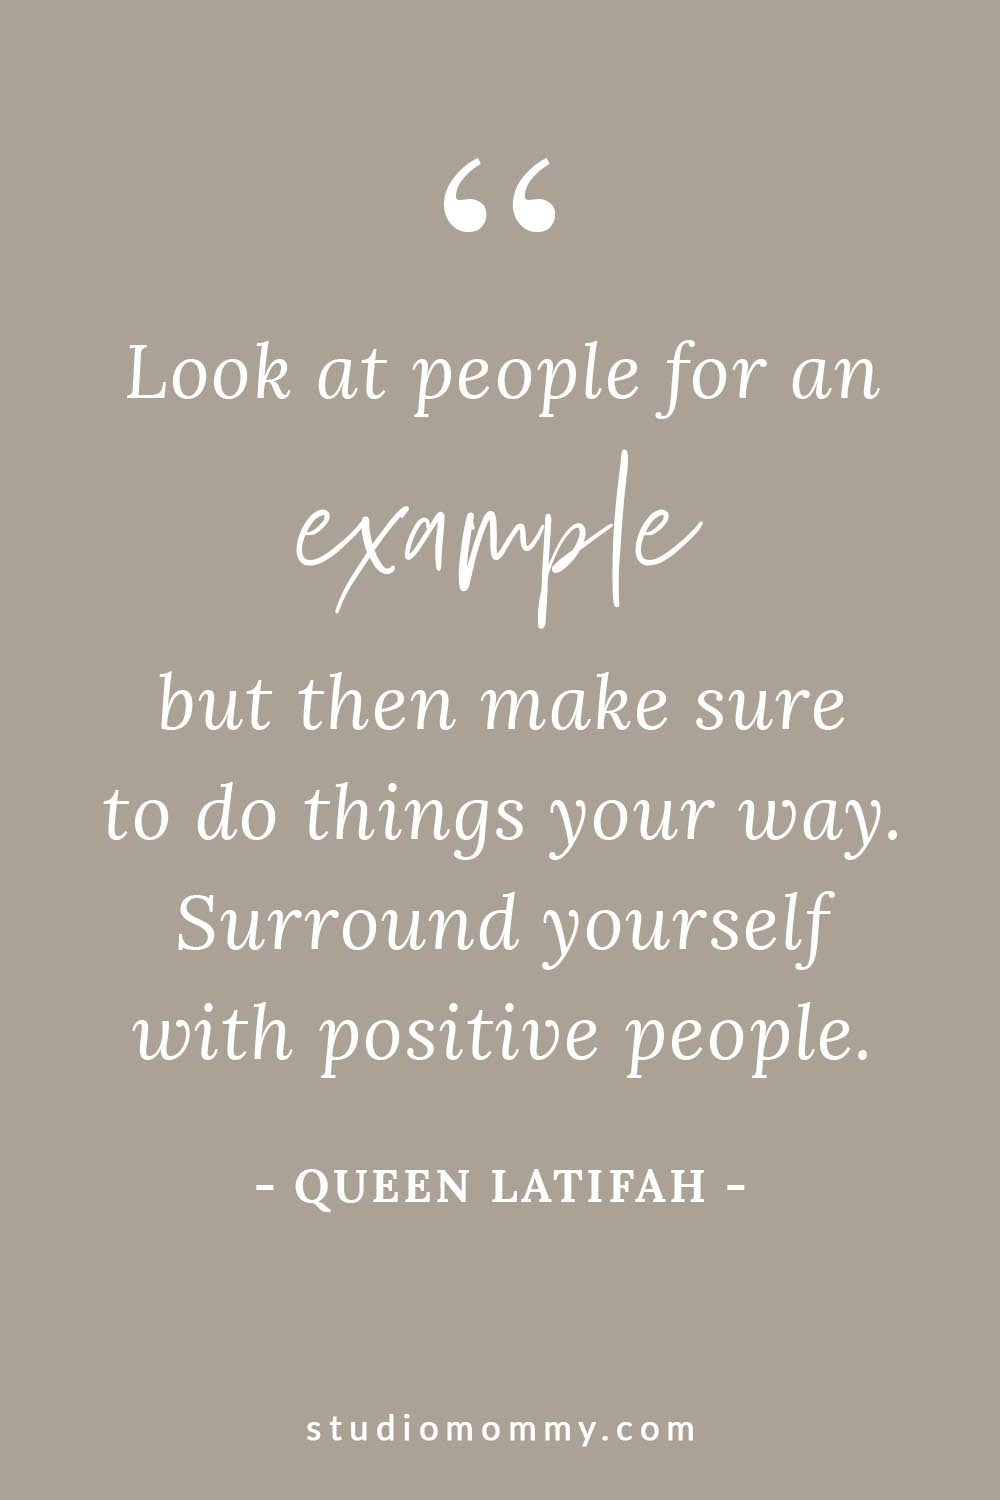 Look at people for an example, but then make sure to do things your way. Surround yourself with positive people. - Queen Latifah